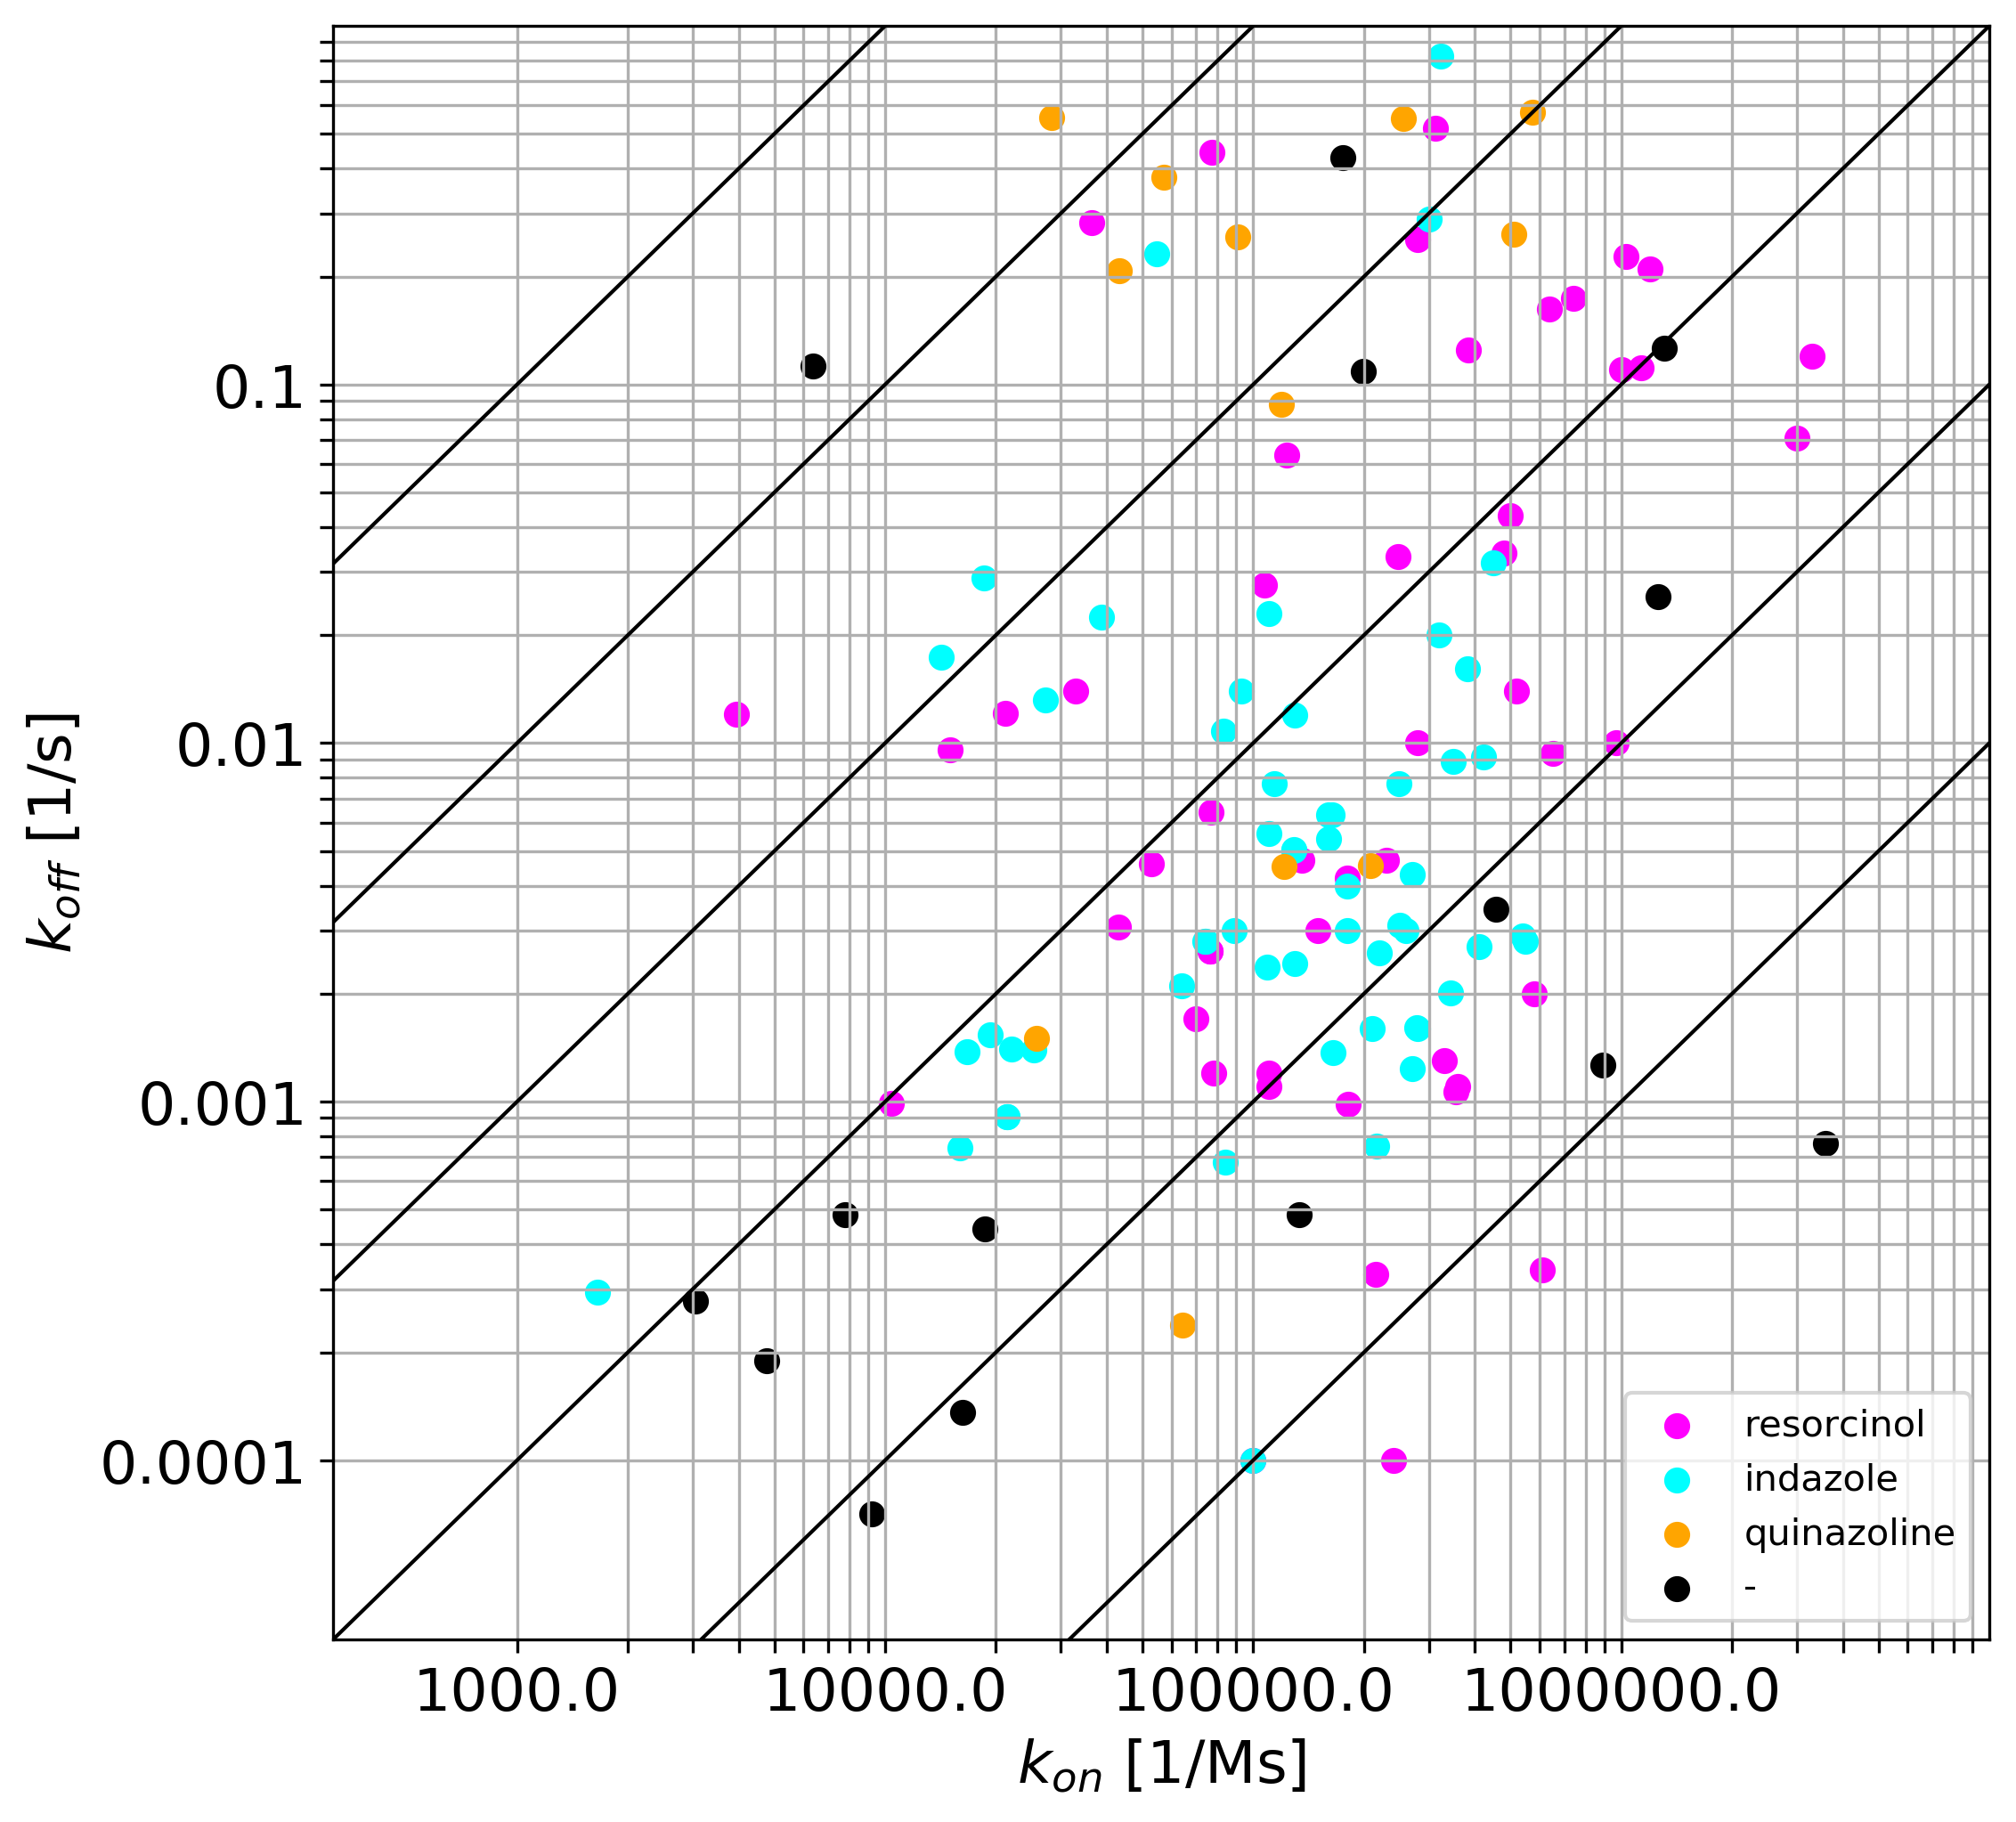 Kinetic rate constants for 110  HSP90 inhibitors: dissociation rate constants are plotted vs association rate constants. Compounds with three main binding core fragments are coloured in cyan, magenta, and orange; the rest of compounds are shown in black